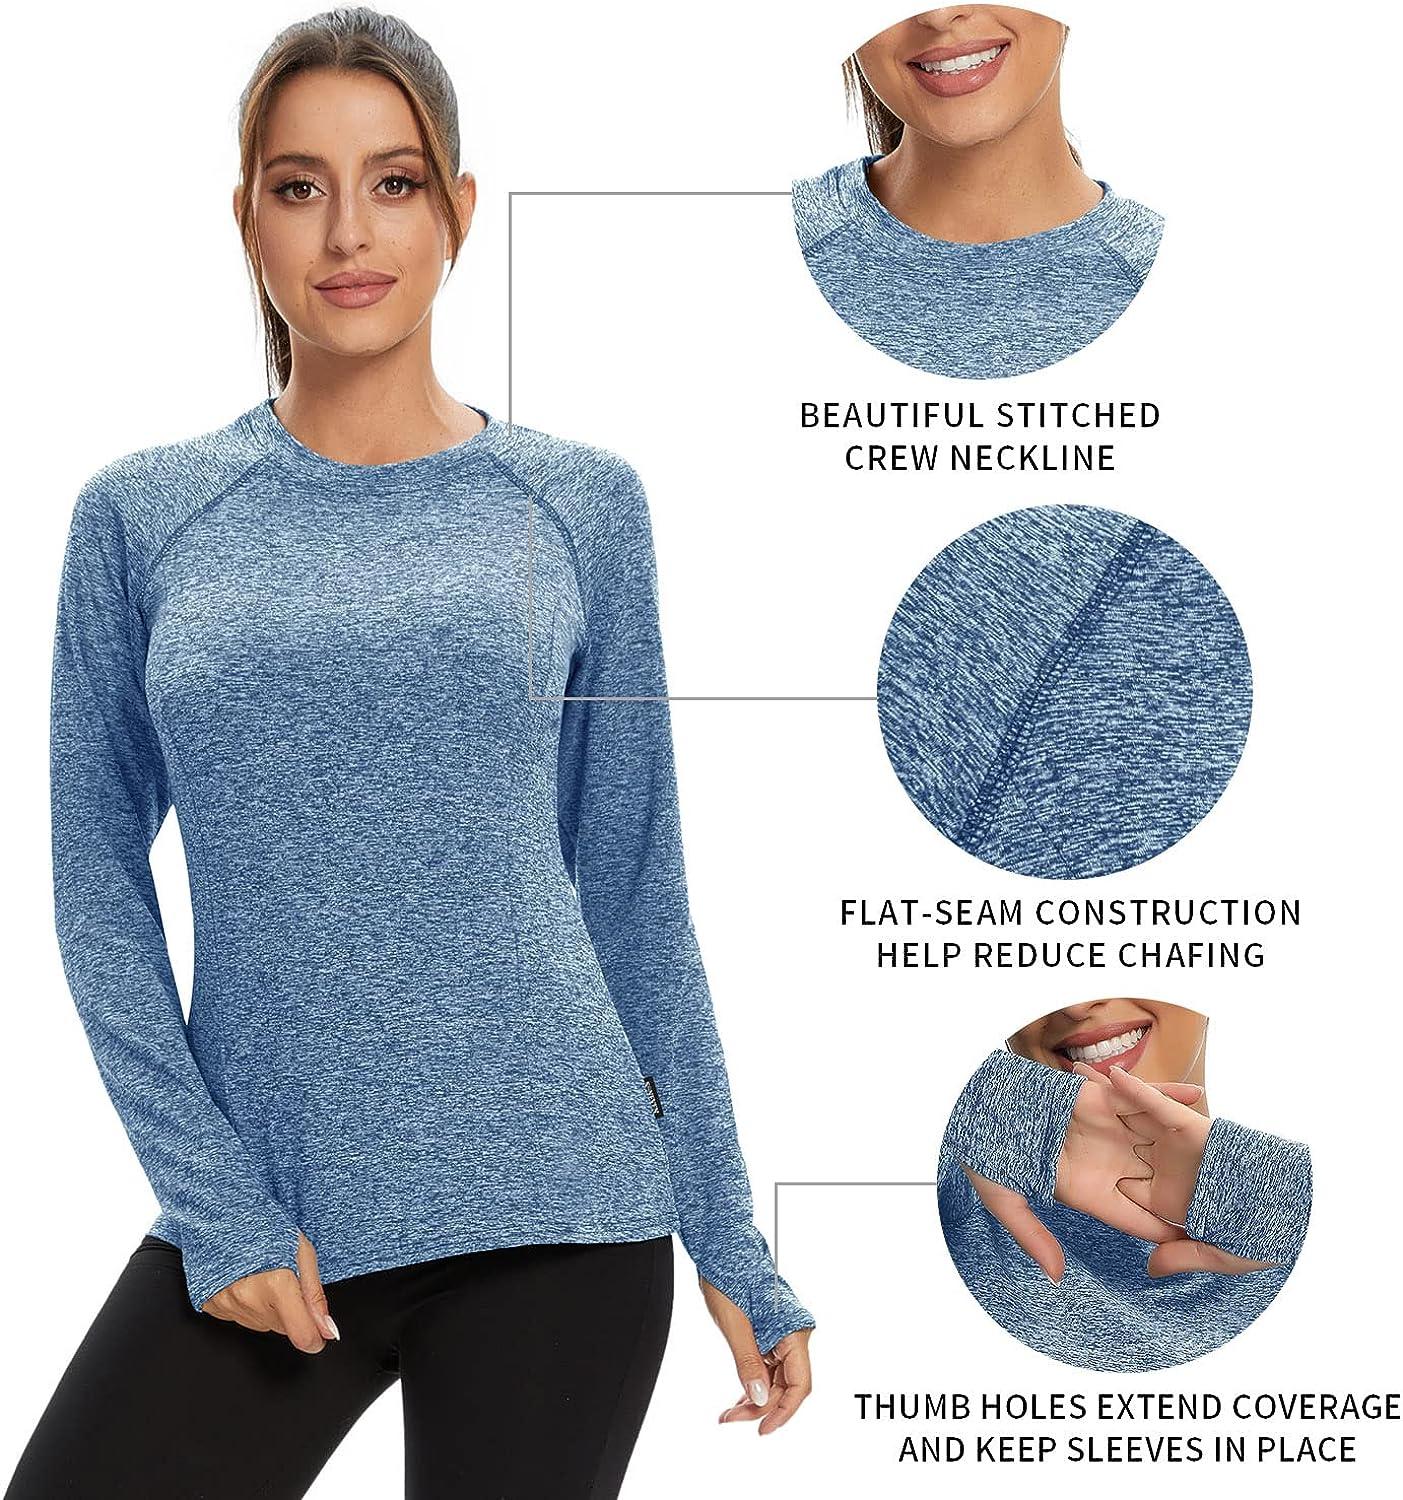 Soneven Women's Thermal Fleece Running Shirts Compression Shirts Quick Dry  Workout Pullover Tops with Thumb Holes Small Crew Neck-haze Blue